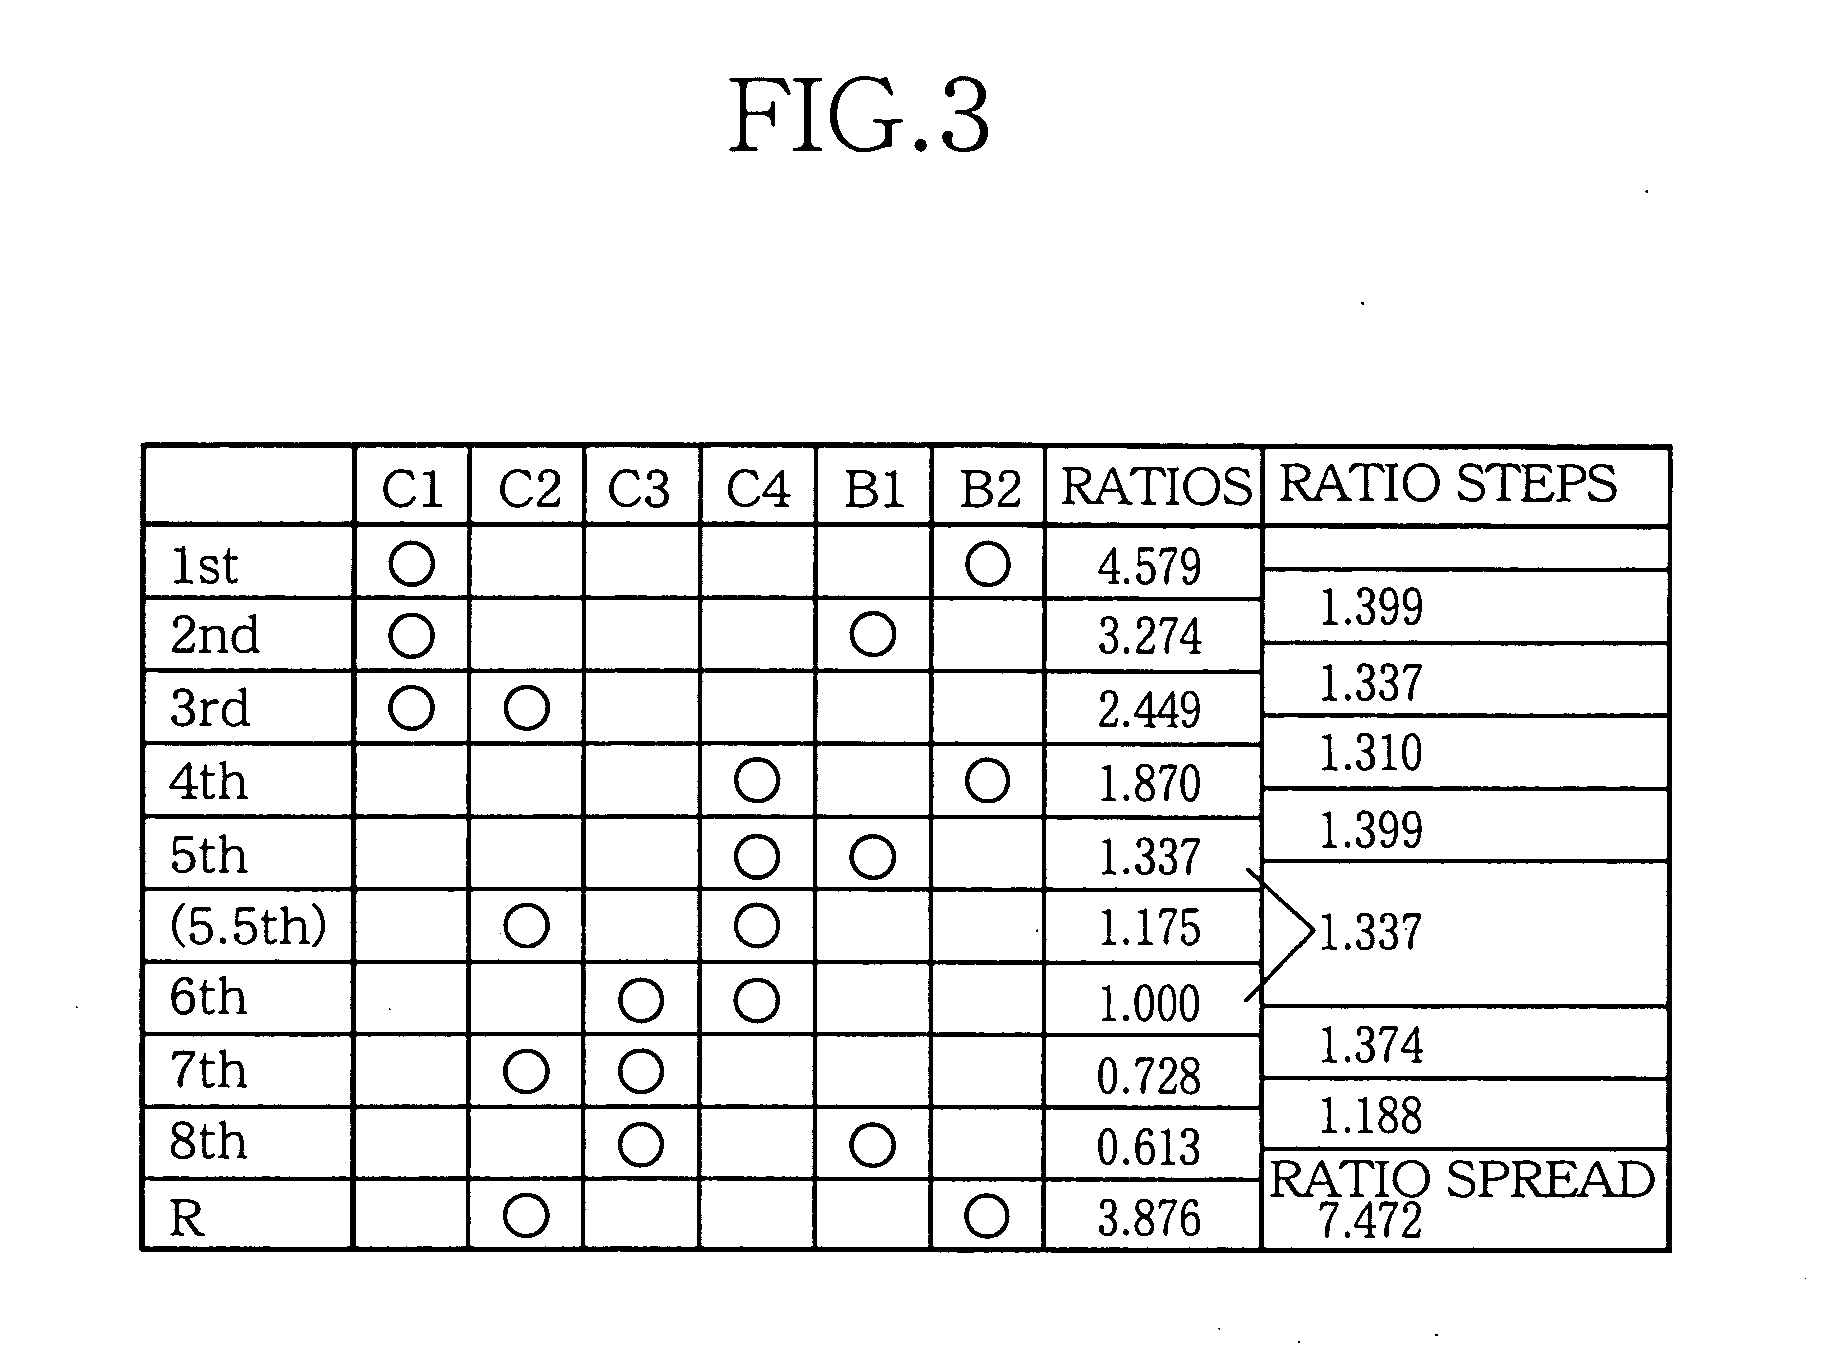 Planetary-gear-type multiple-step transmission for vehicle